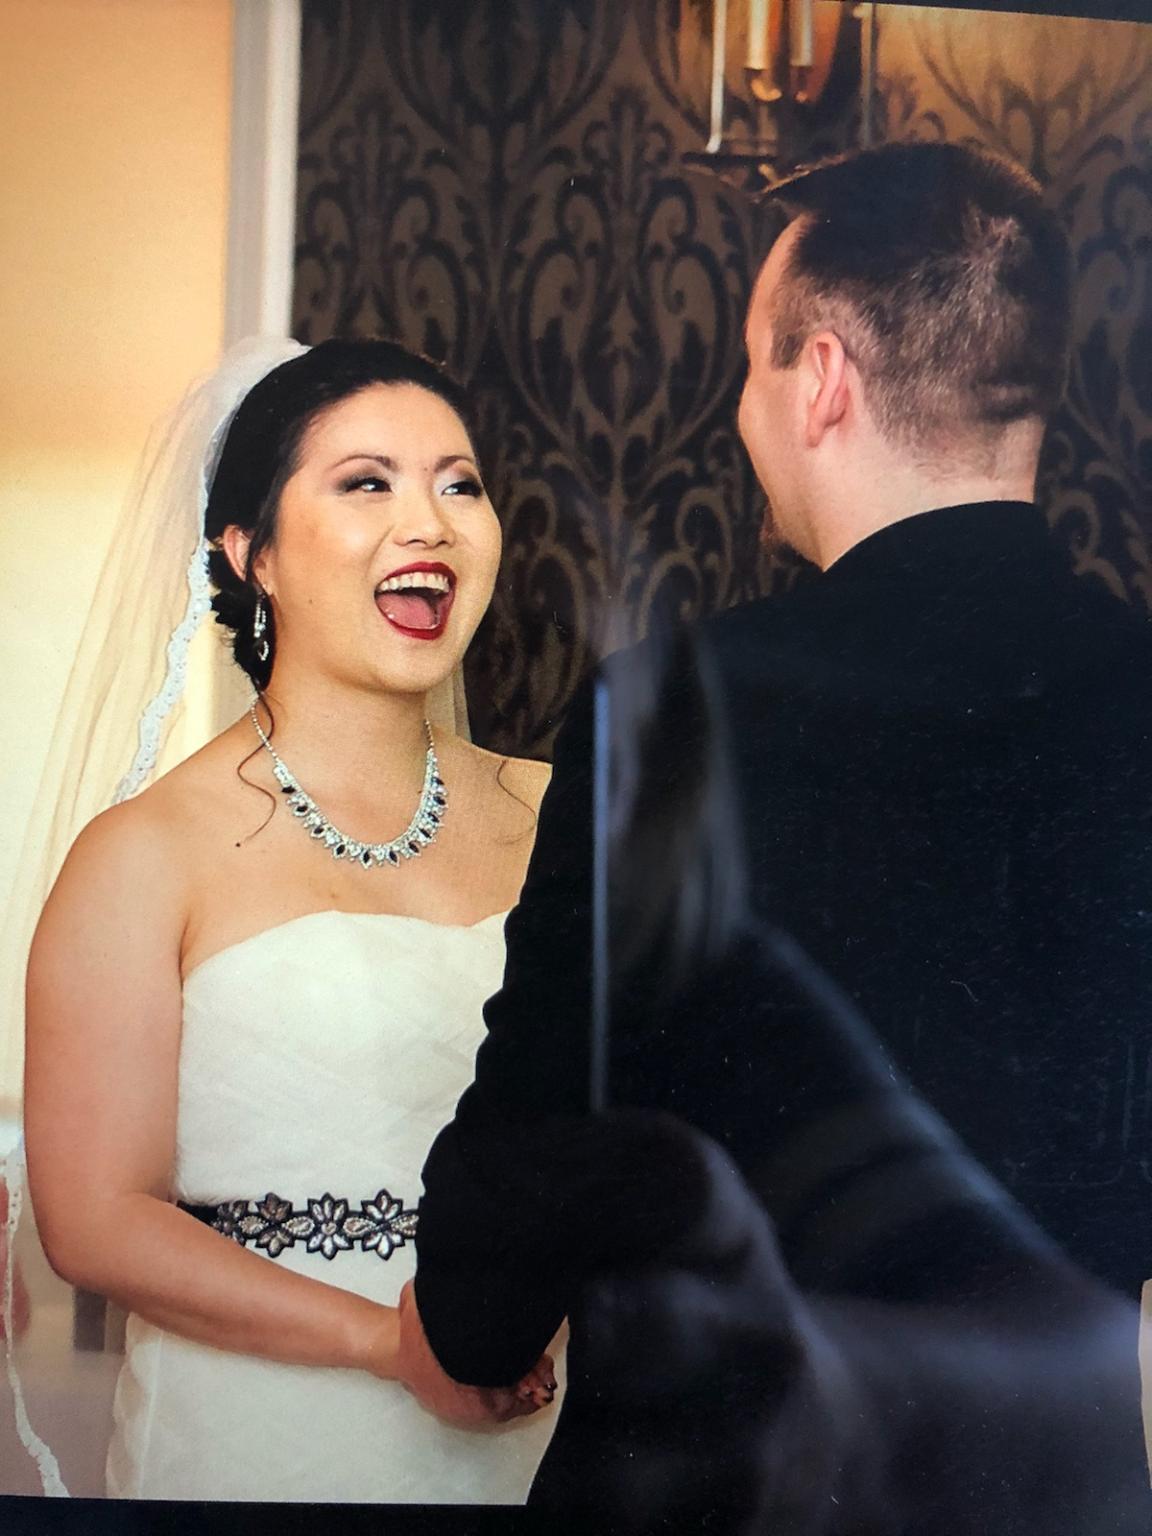 A sweet photo of a groom and a happy bride with beautiful glam makeup